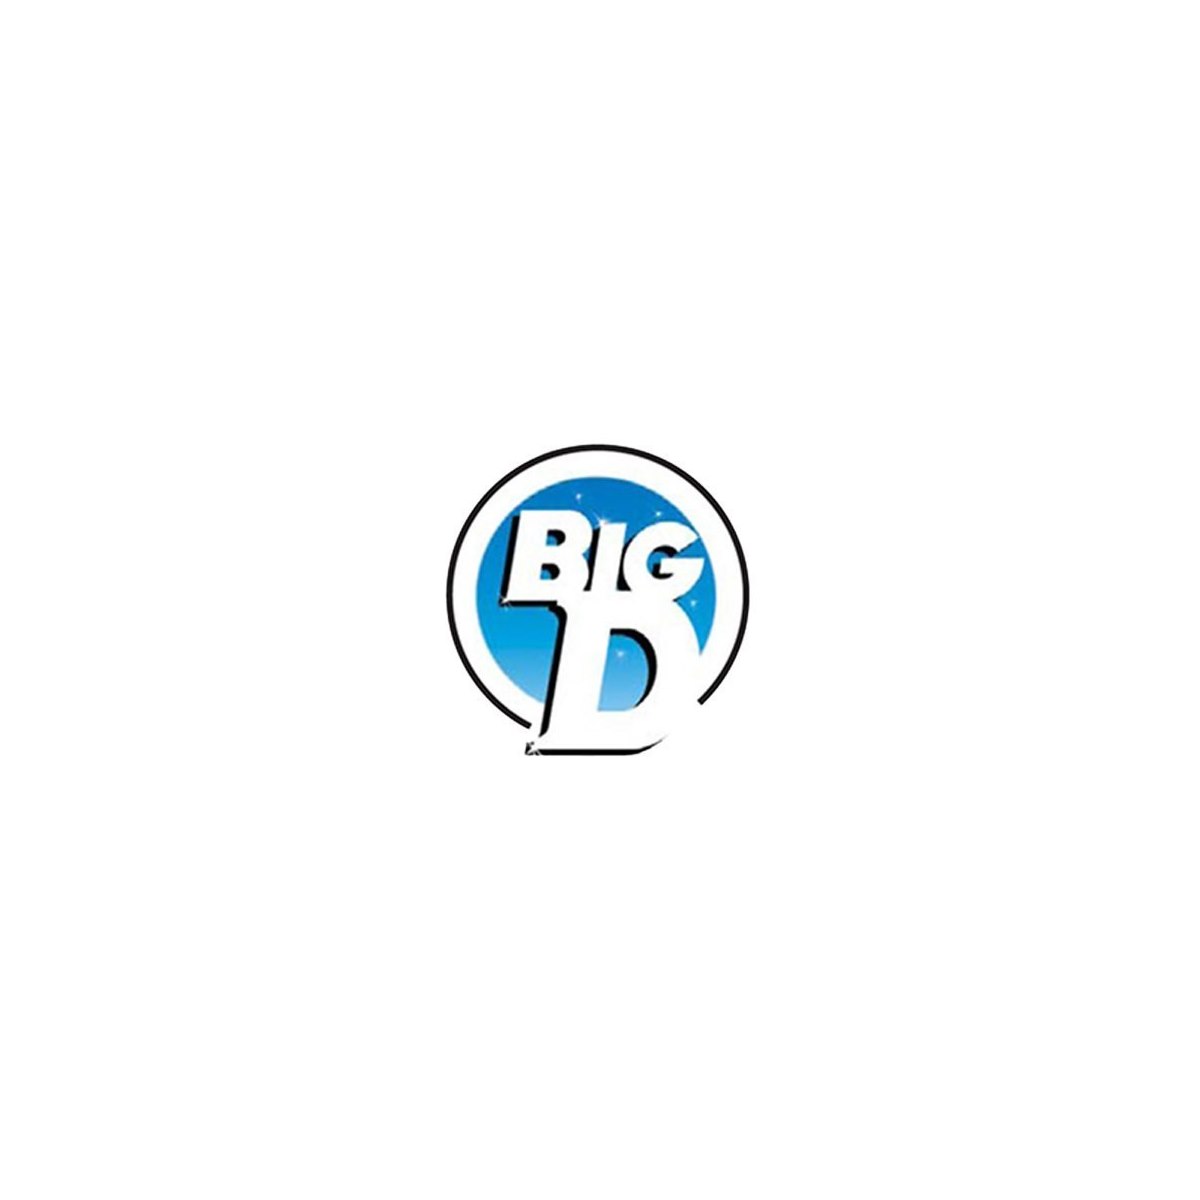 Where to Buy Big D Products